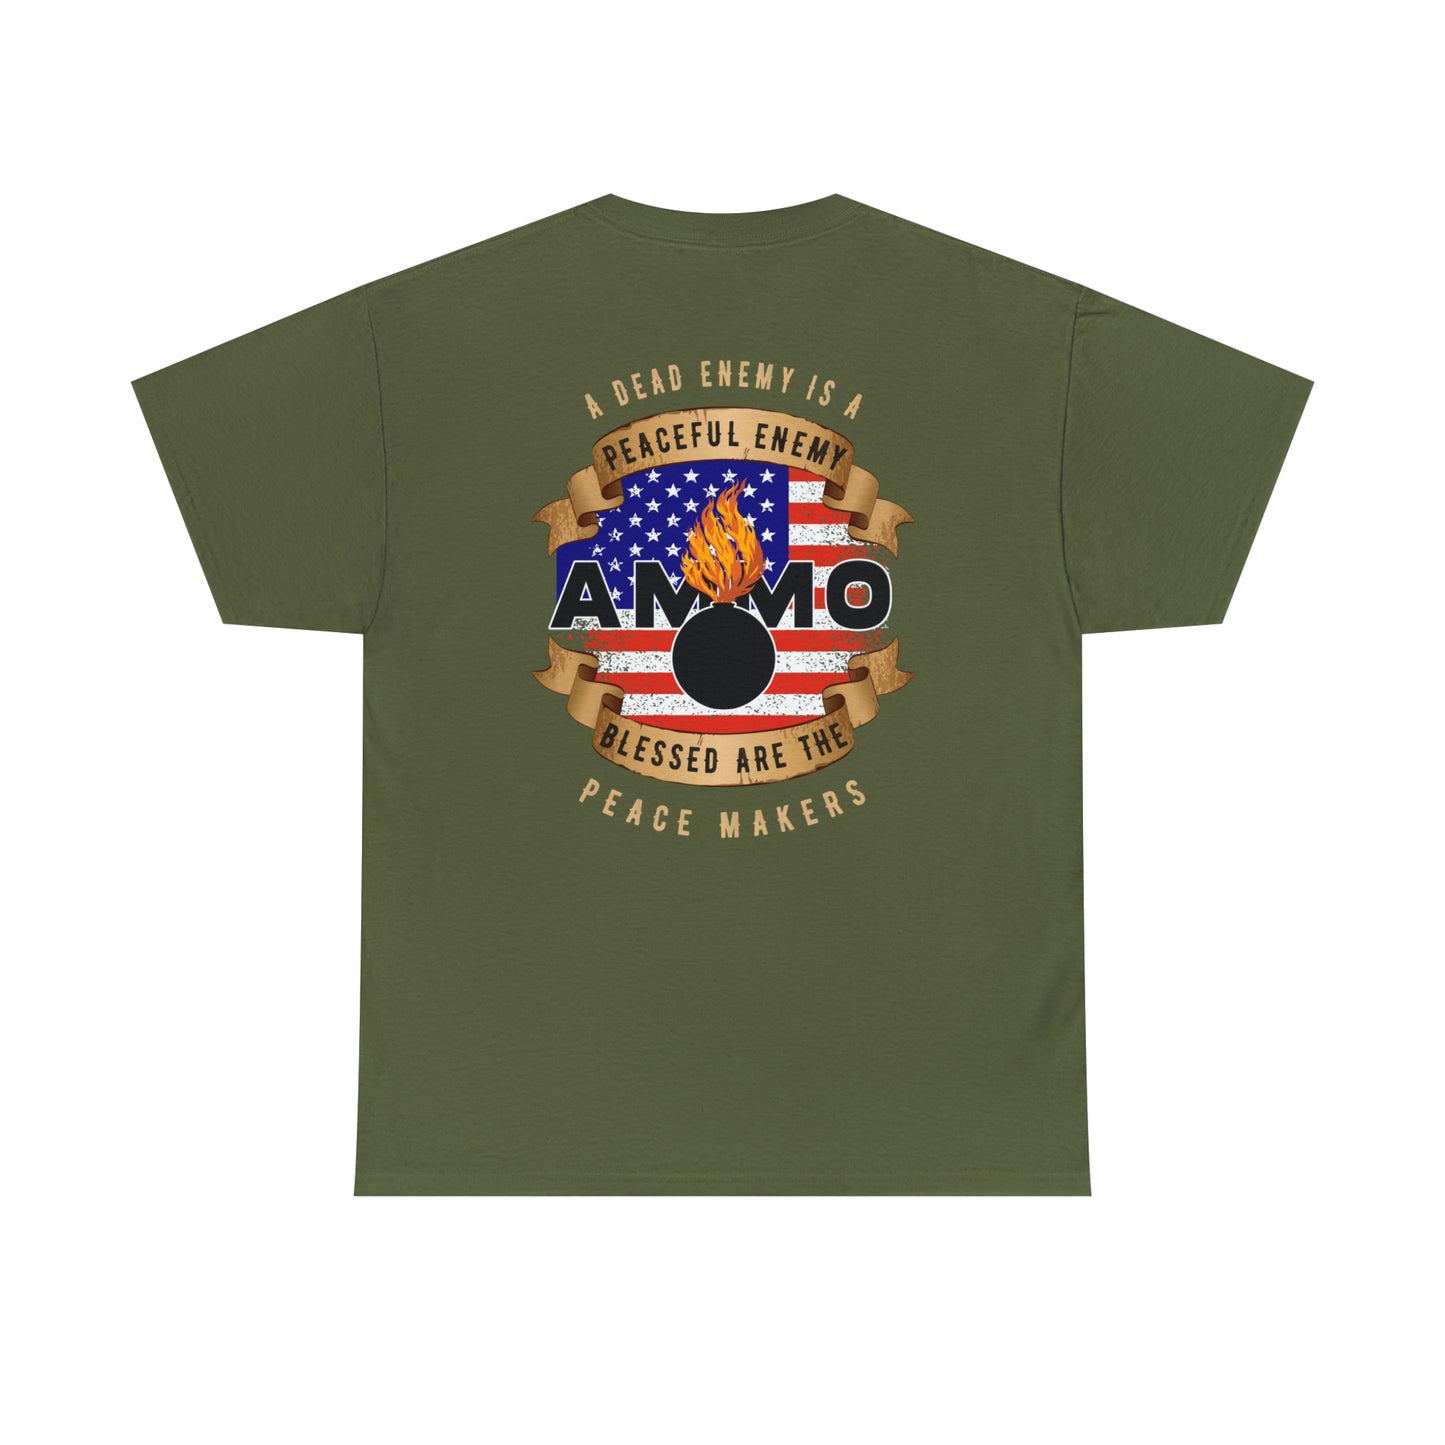 USAF AMMO A Dead Enemy Is A Peaceful Enemy Blessed Are The Peace Makers Pisspot Unisex Heavy Cotton Tee